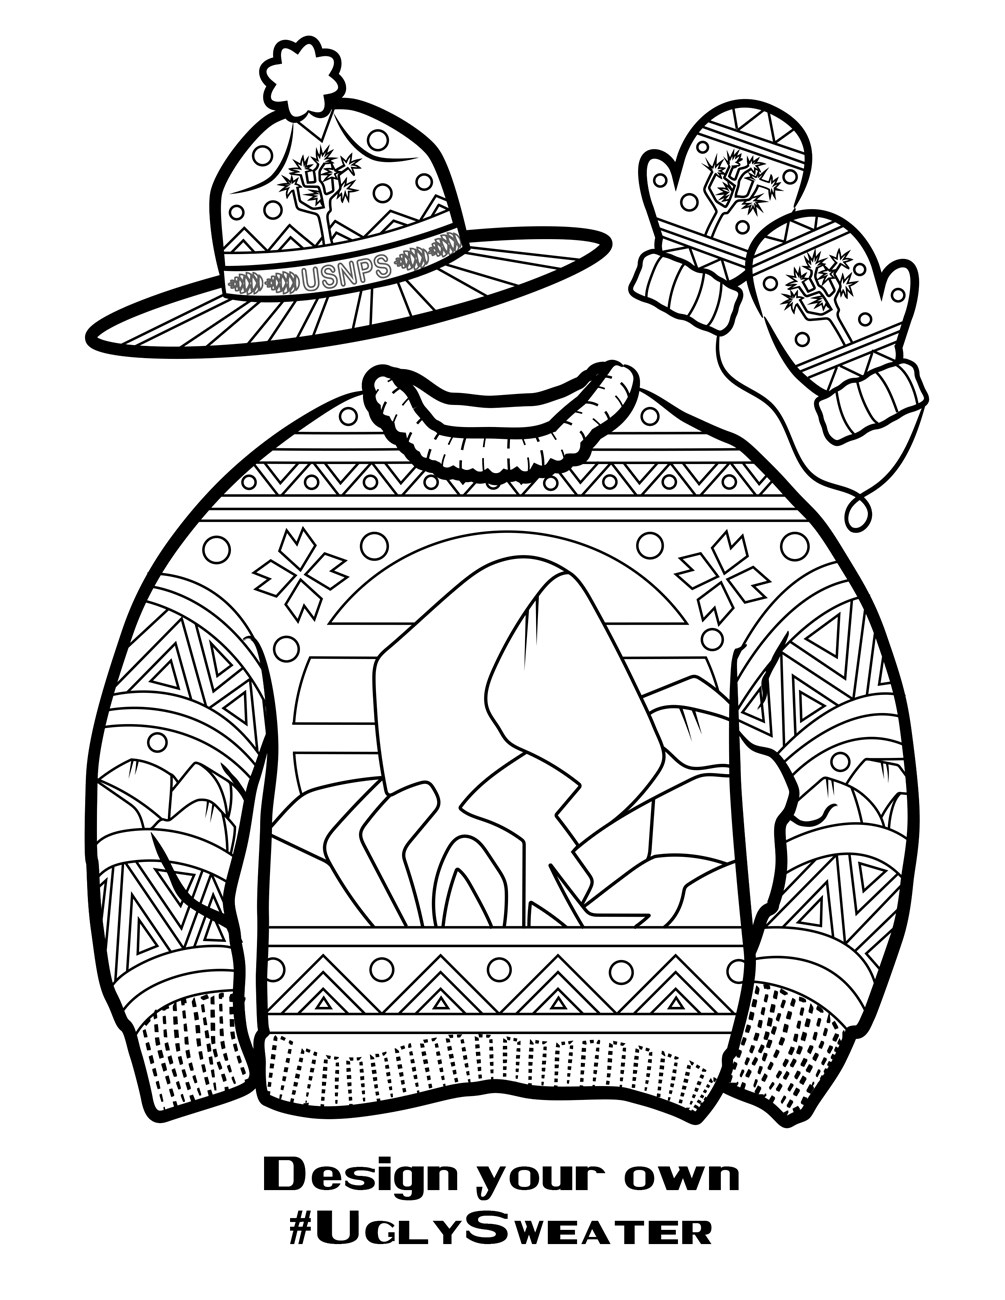 A coloring book page with a sweater with rock designs